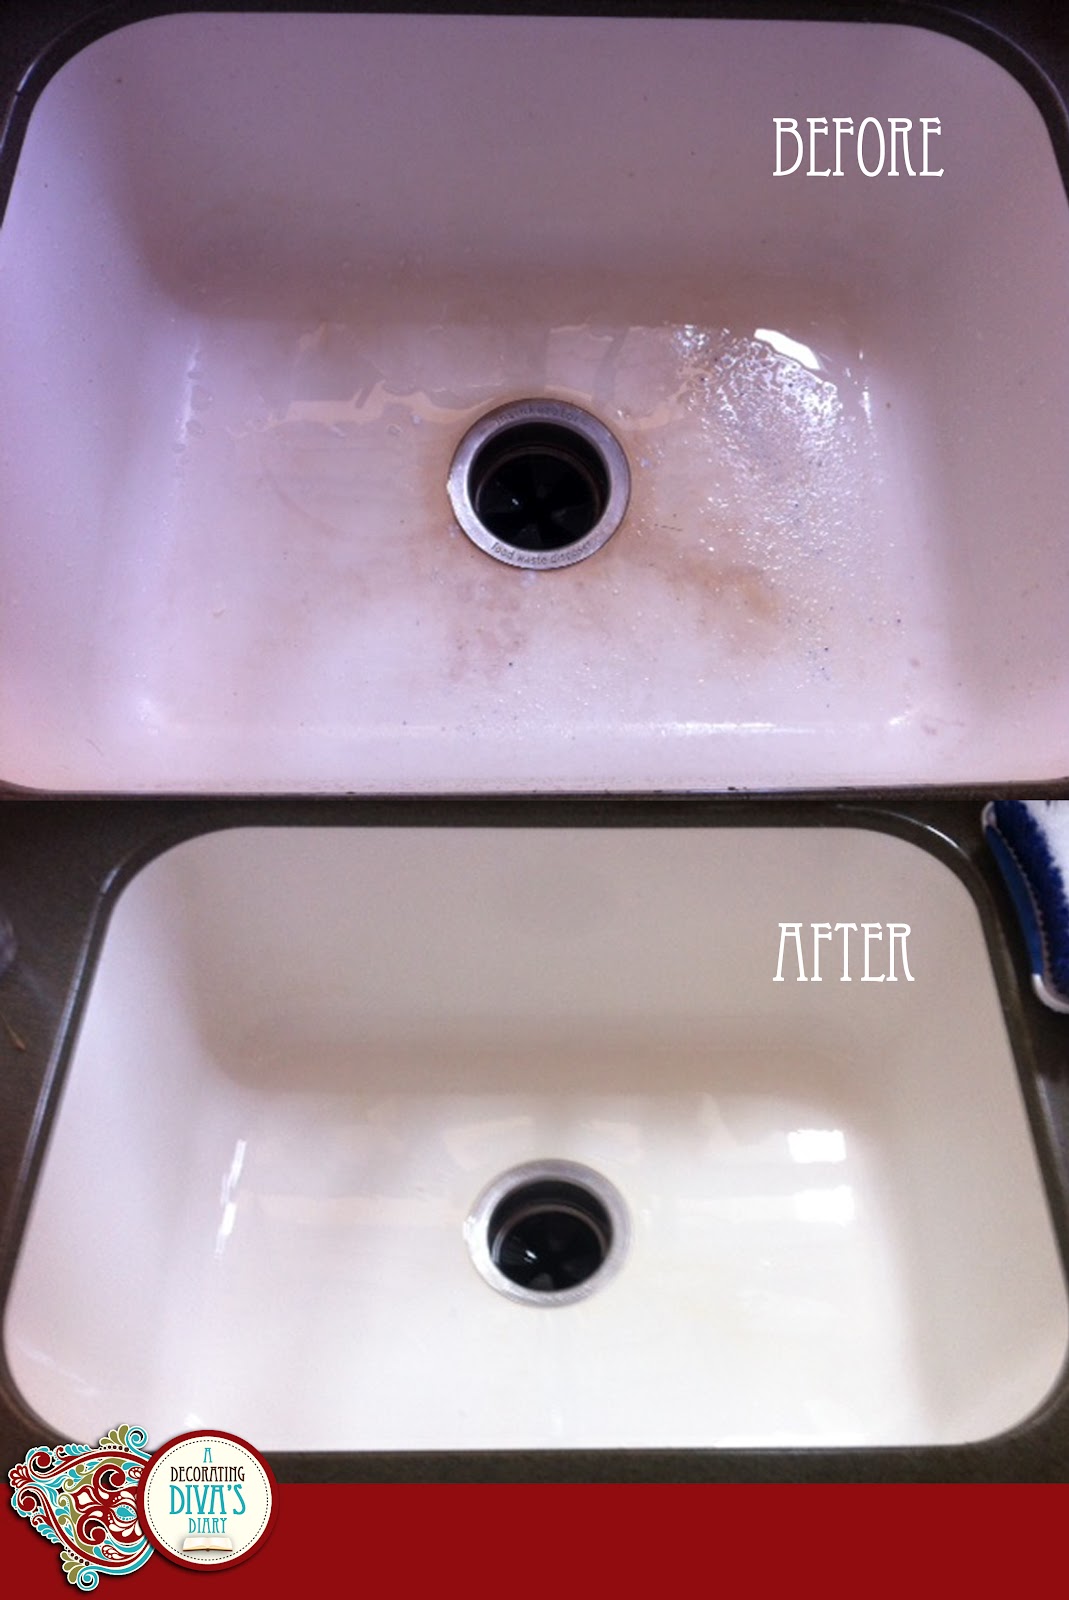 At Home How To Getting That Porcelain Sink To Sparkle